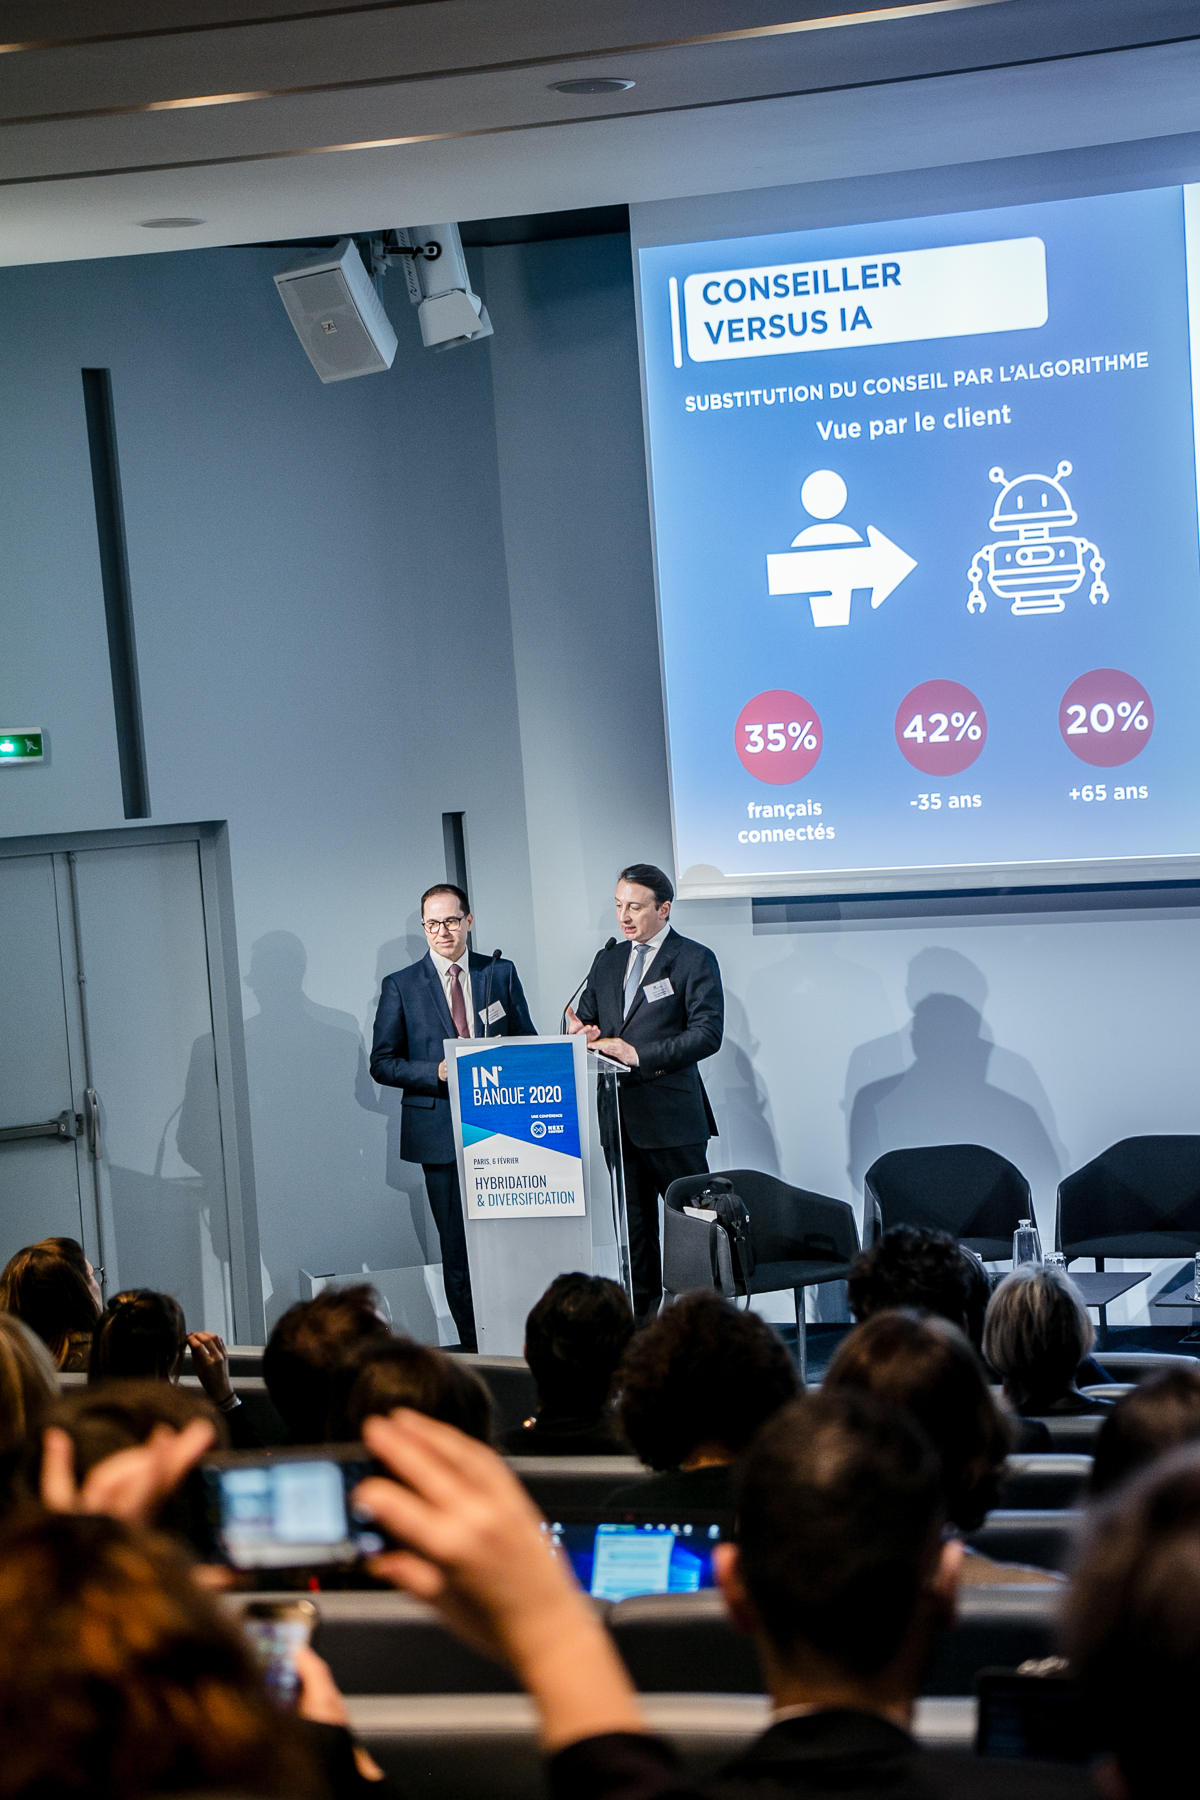 Christophe Husson et Olivier Dondeyne (CGI Business Consulting) - IN BANQUE 2020 - Crédit photo : Guillermo Gomez